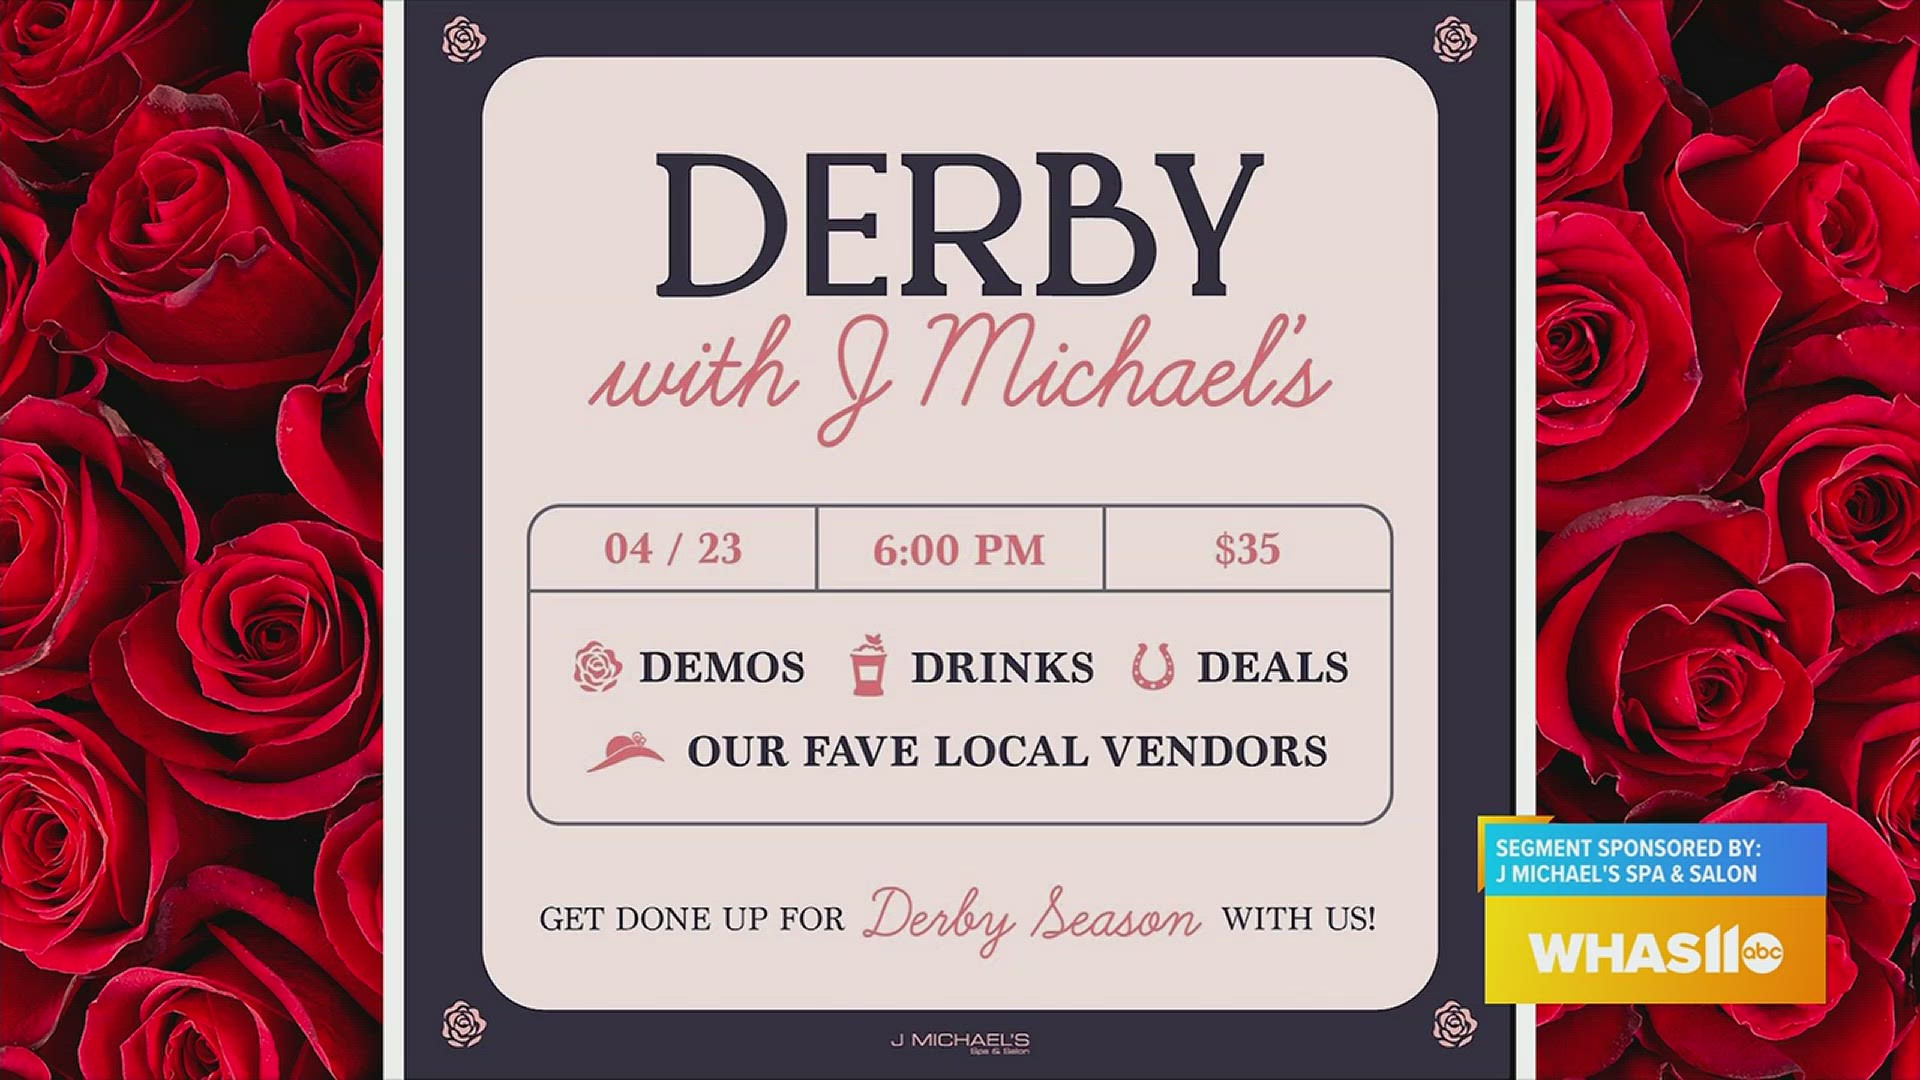 The Derby with J Michael's Event is happening April 23rd at 6pm!